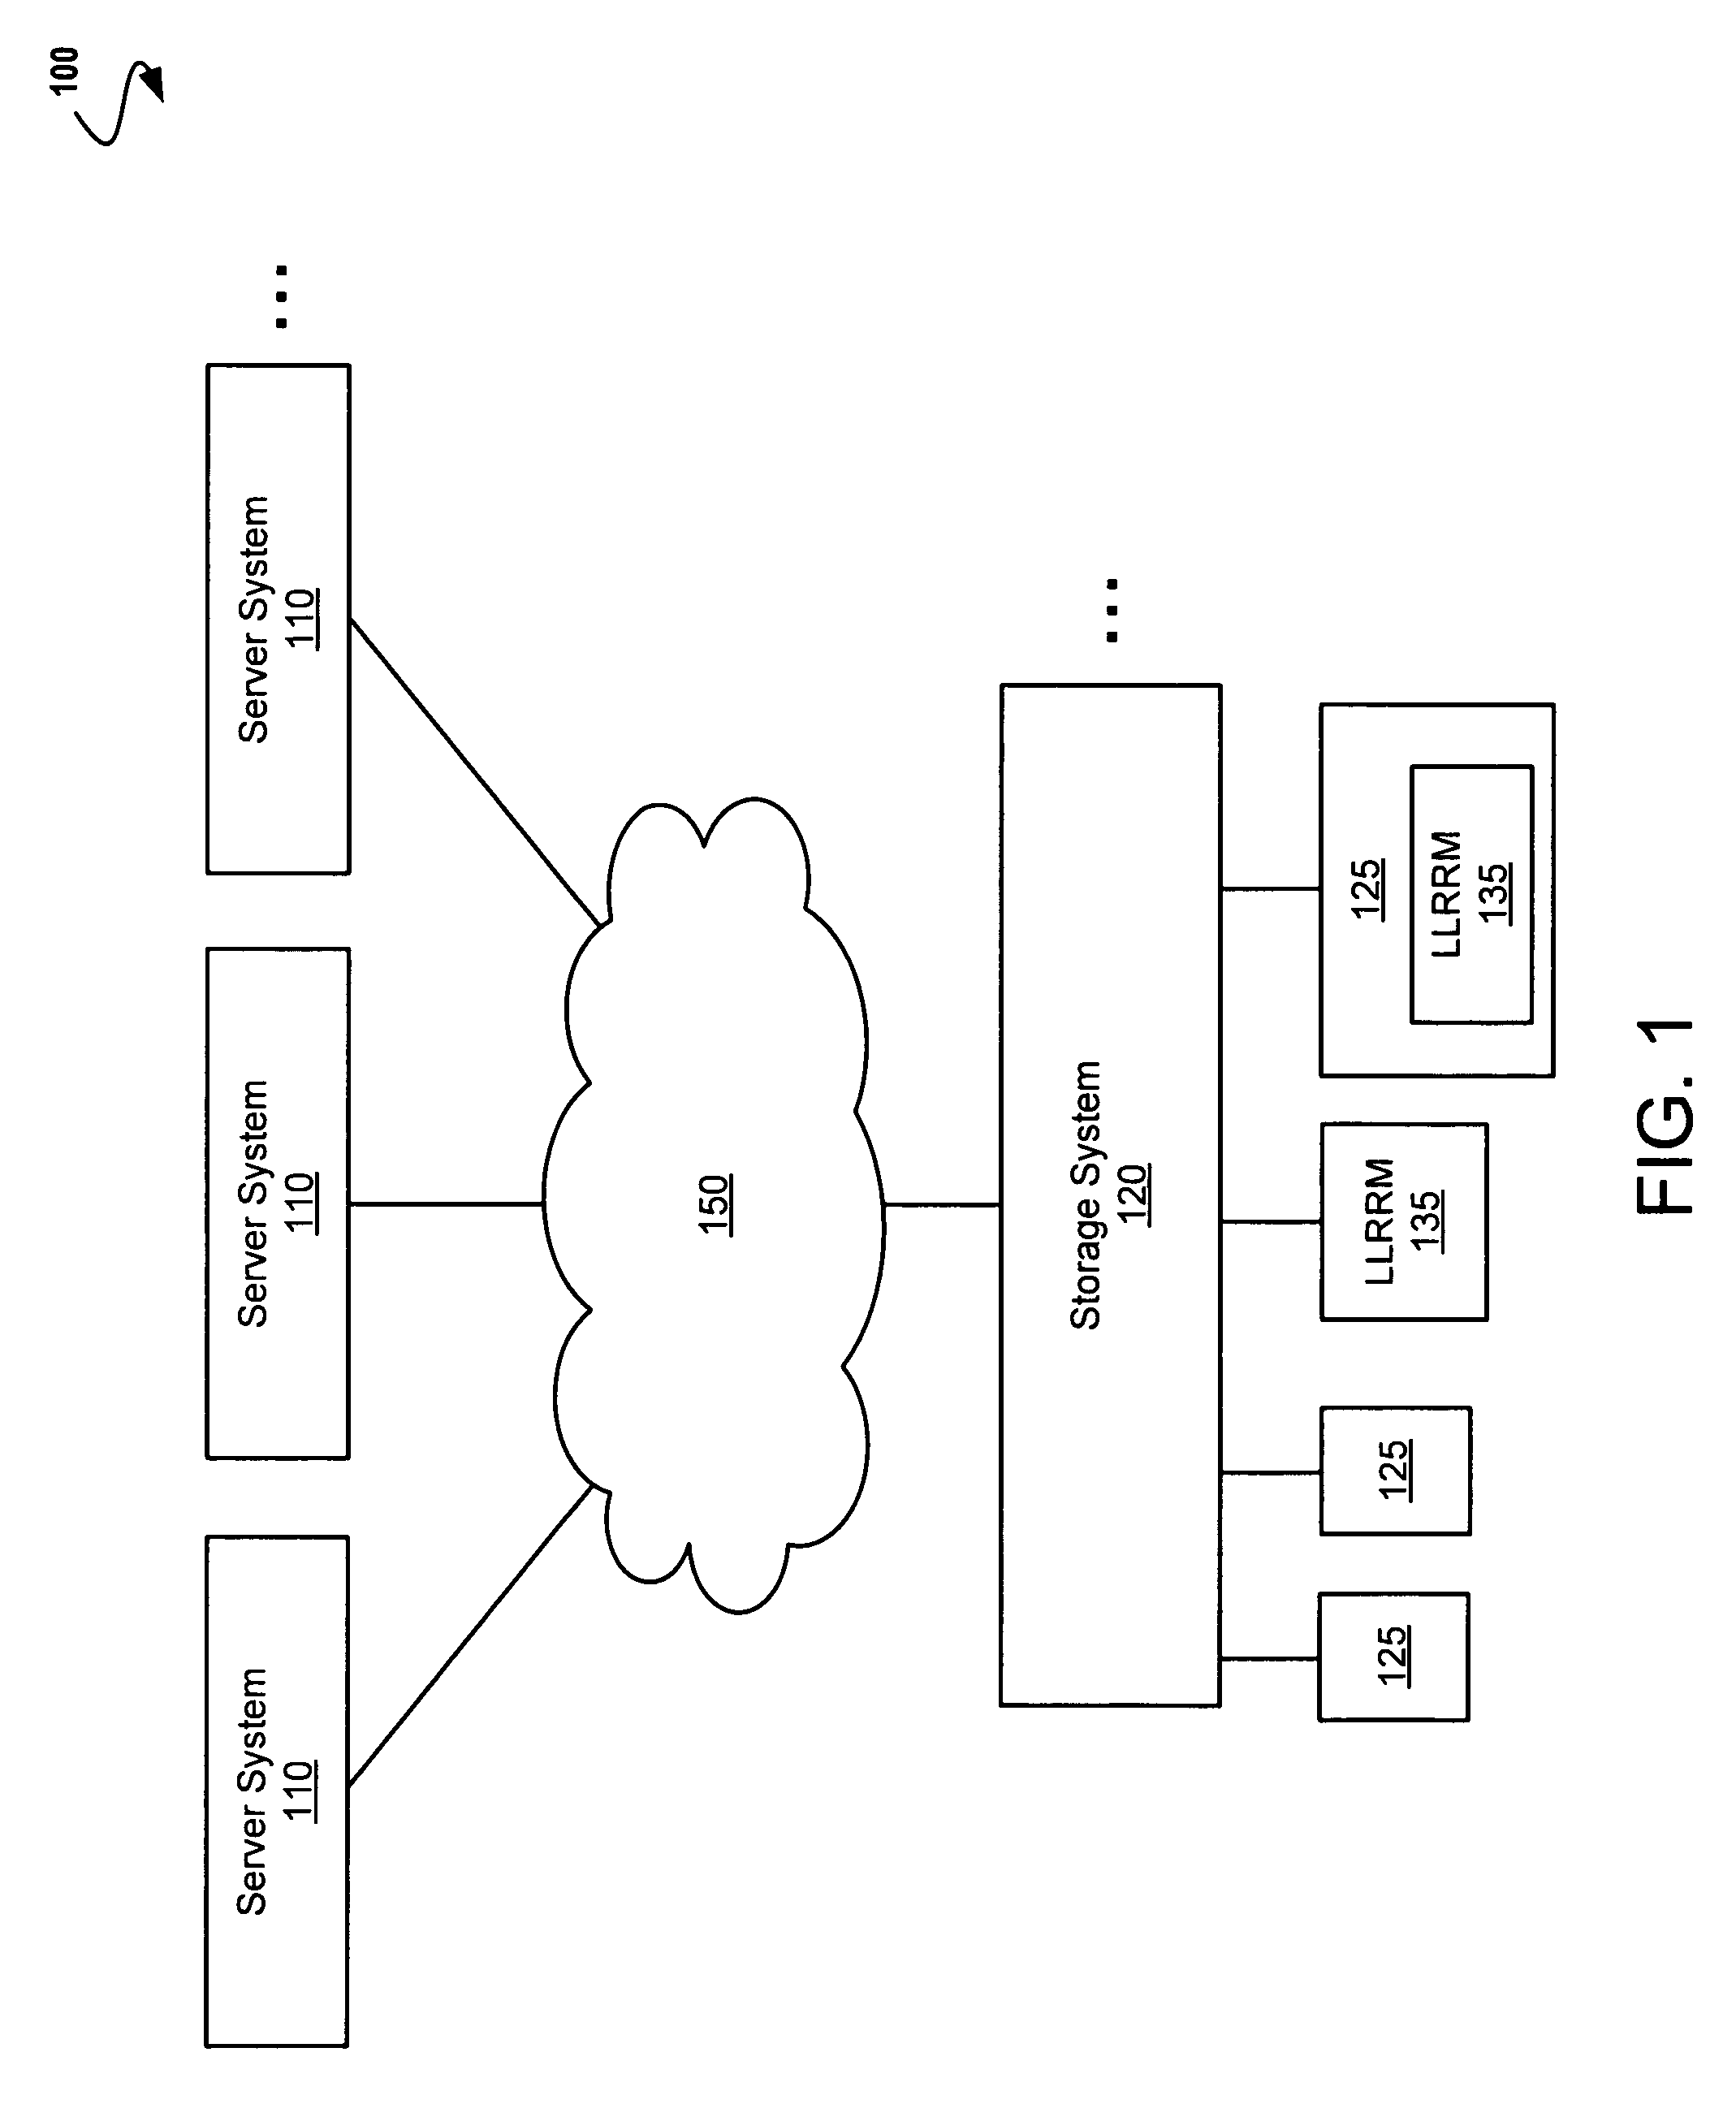 Scheduling access requests for a multi-bank low-latency random read memory device